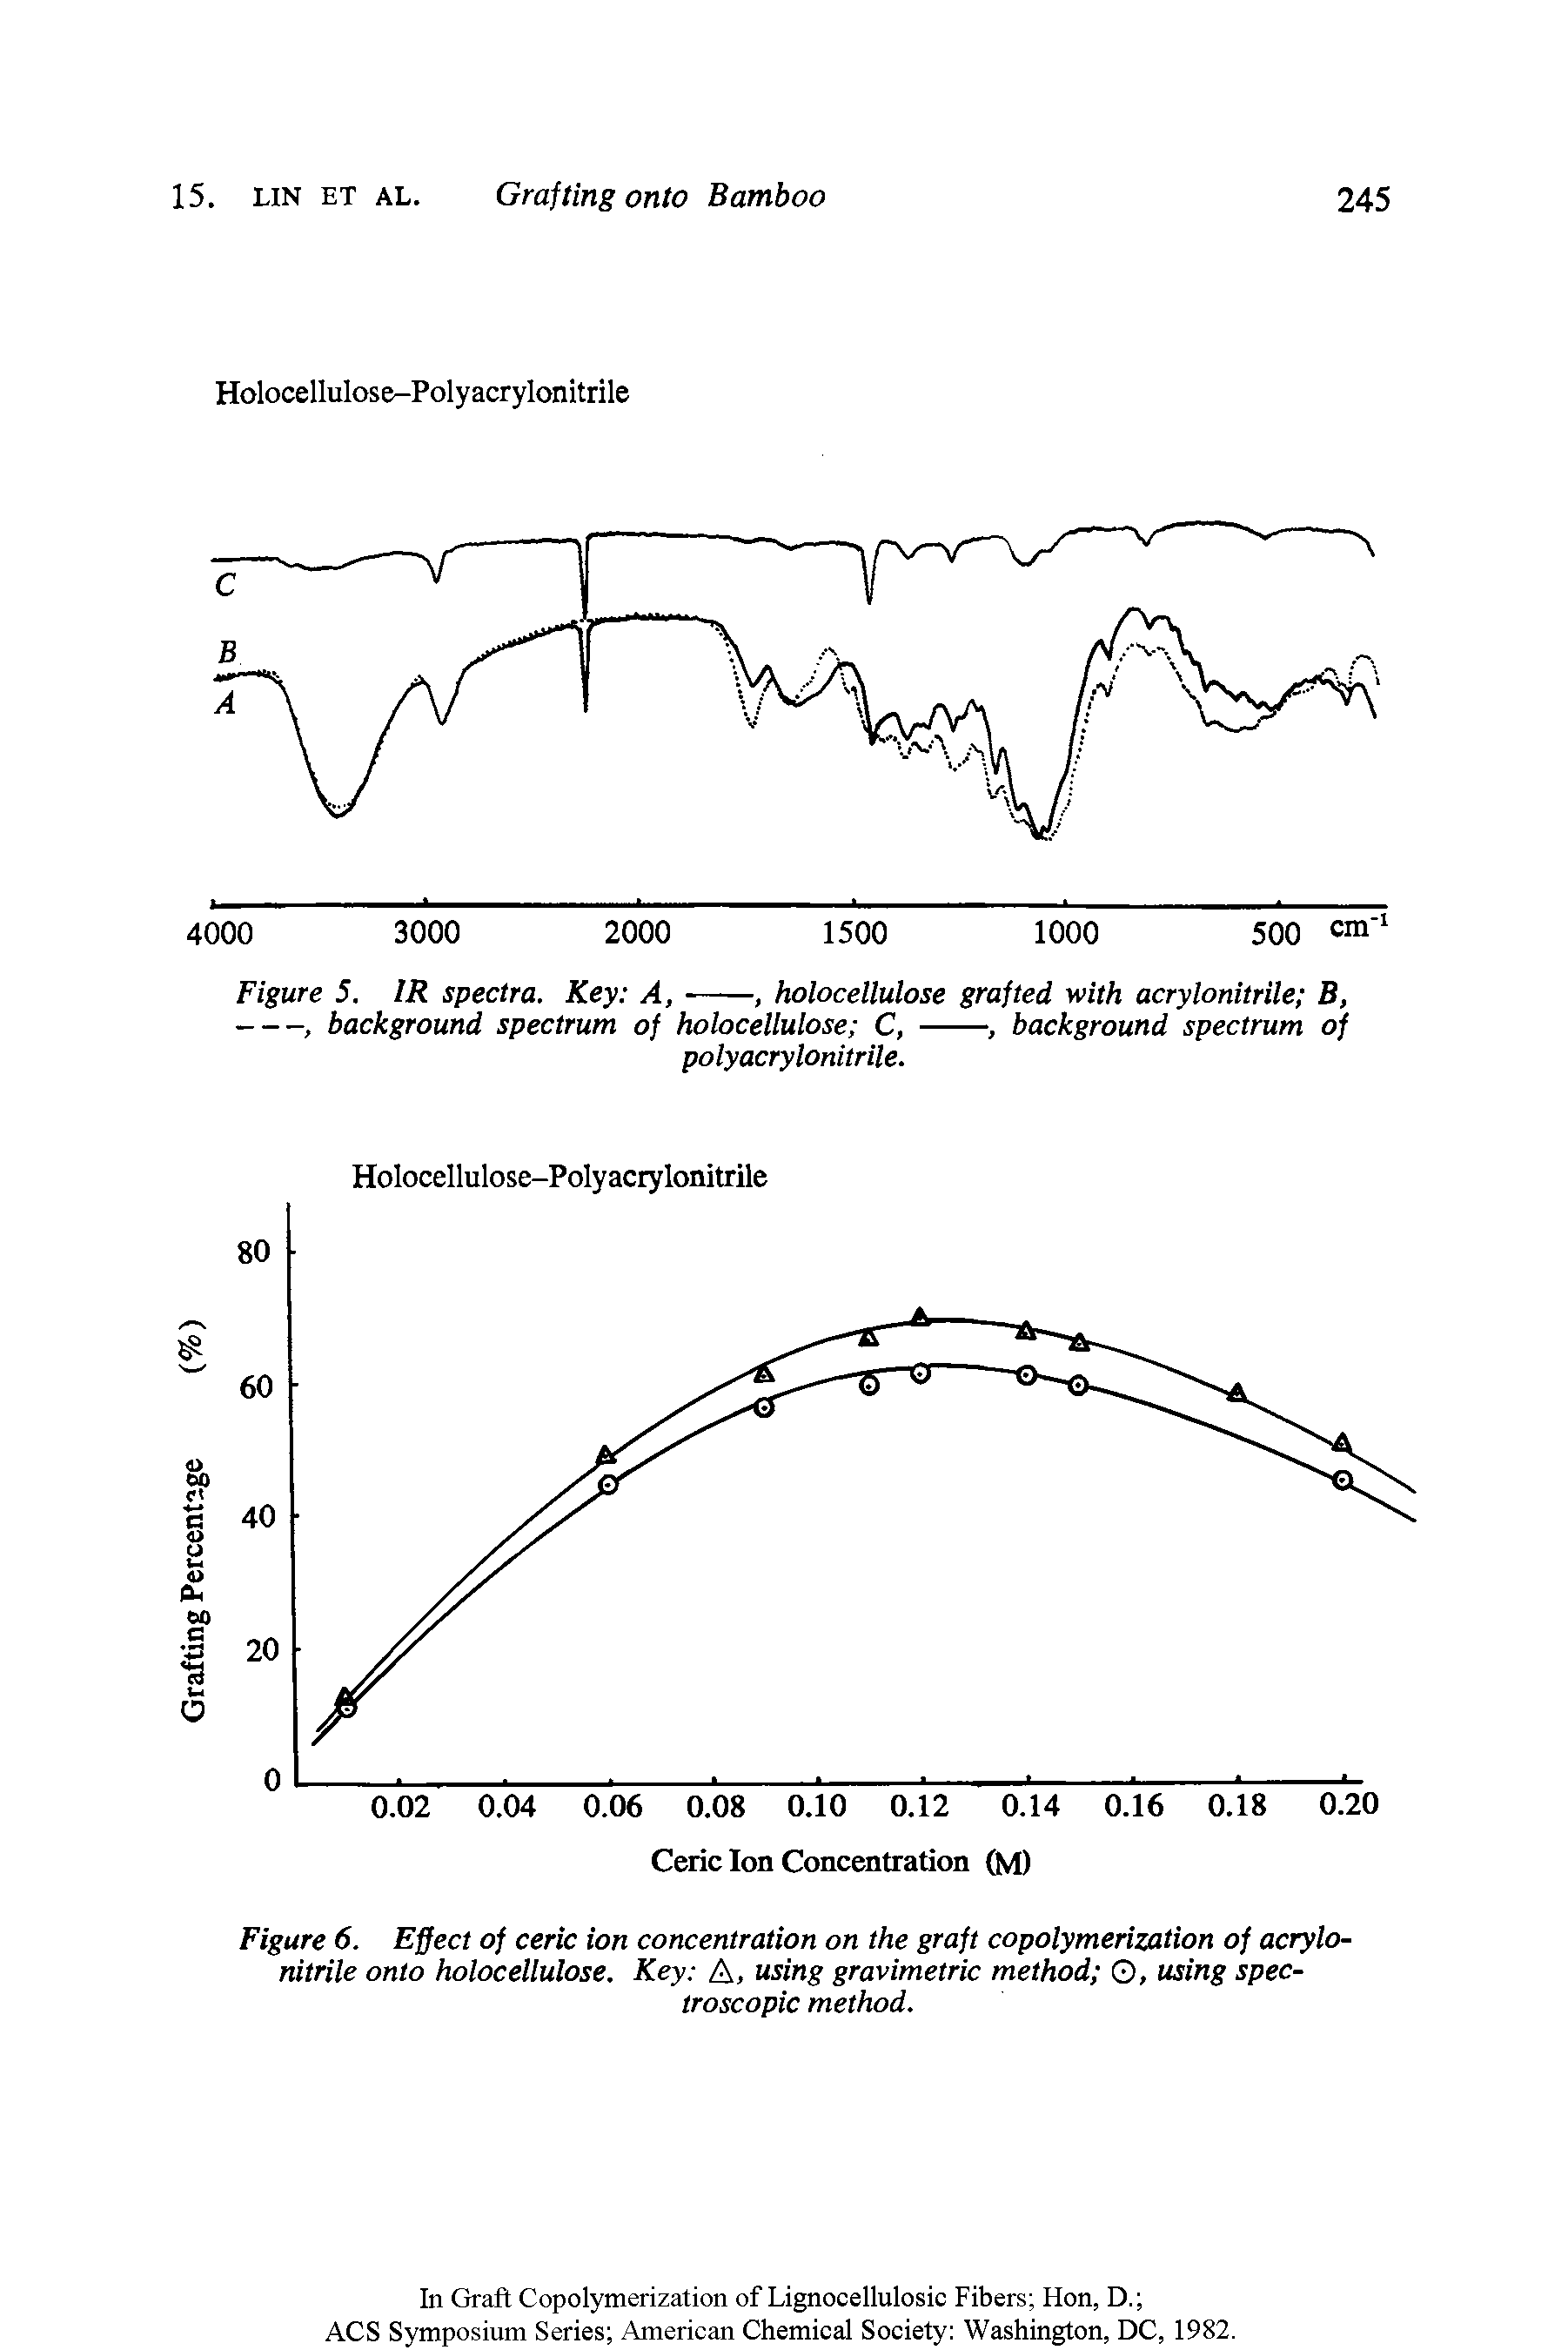 Figure 6. Effect of ceric ion concentration on the graft copolymerization of acrylonitrile onto holocellulose. Key A, using gravimetric method O, using spectroscopic method.